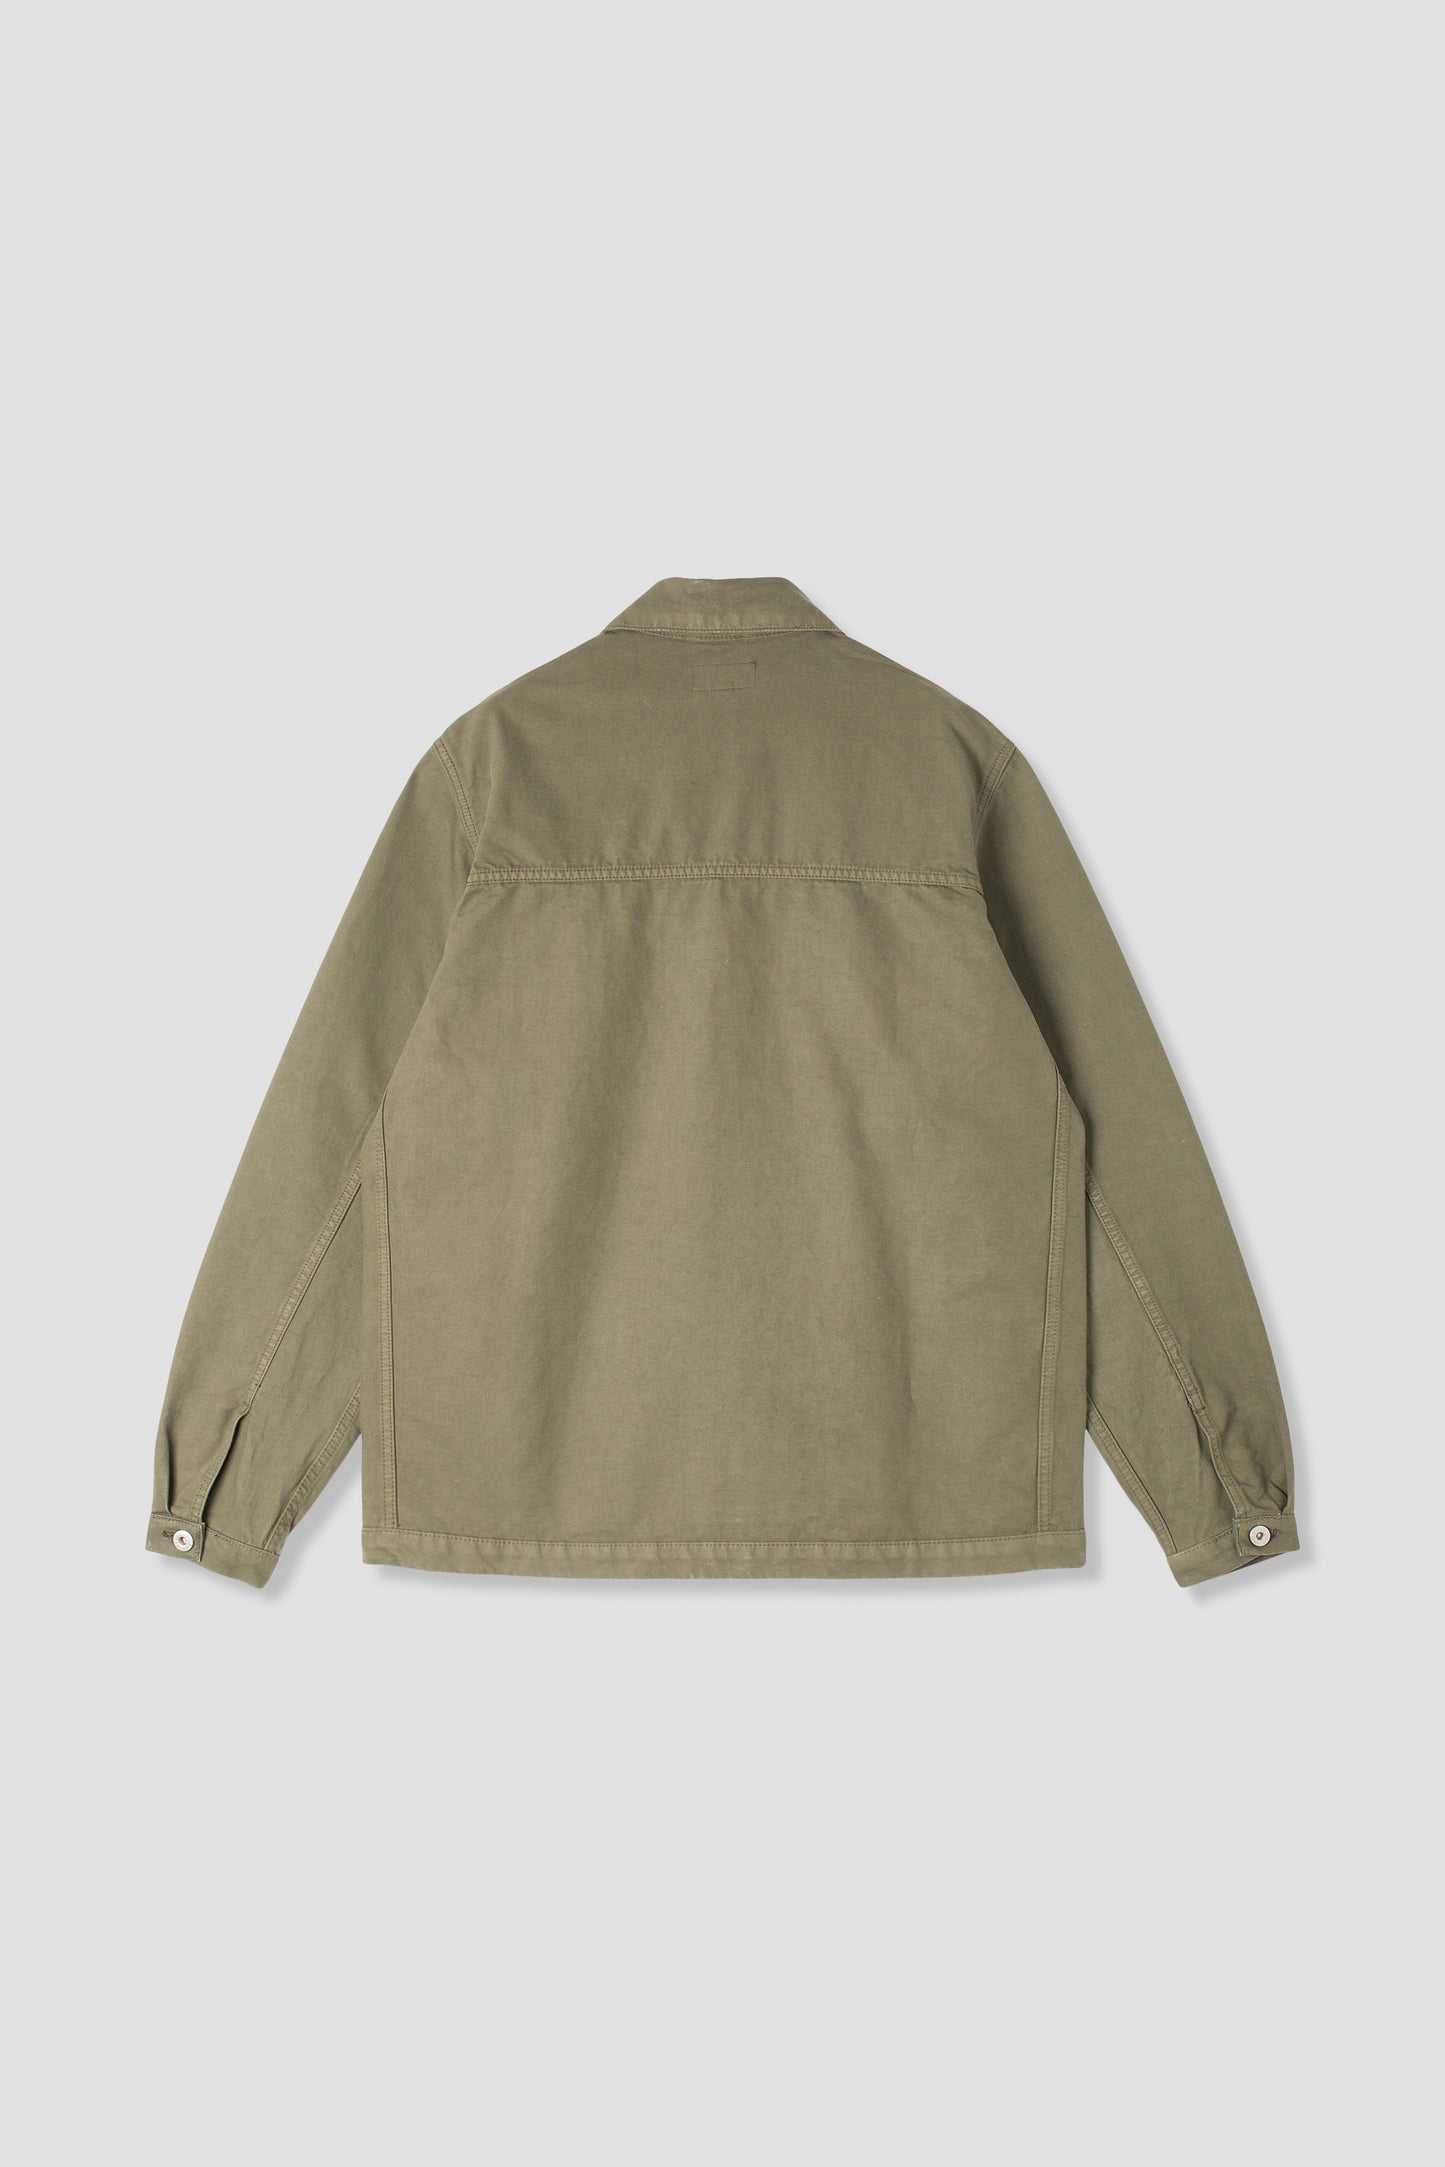 Coverall Jacket, Unlined (Olive Twill)